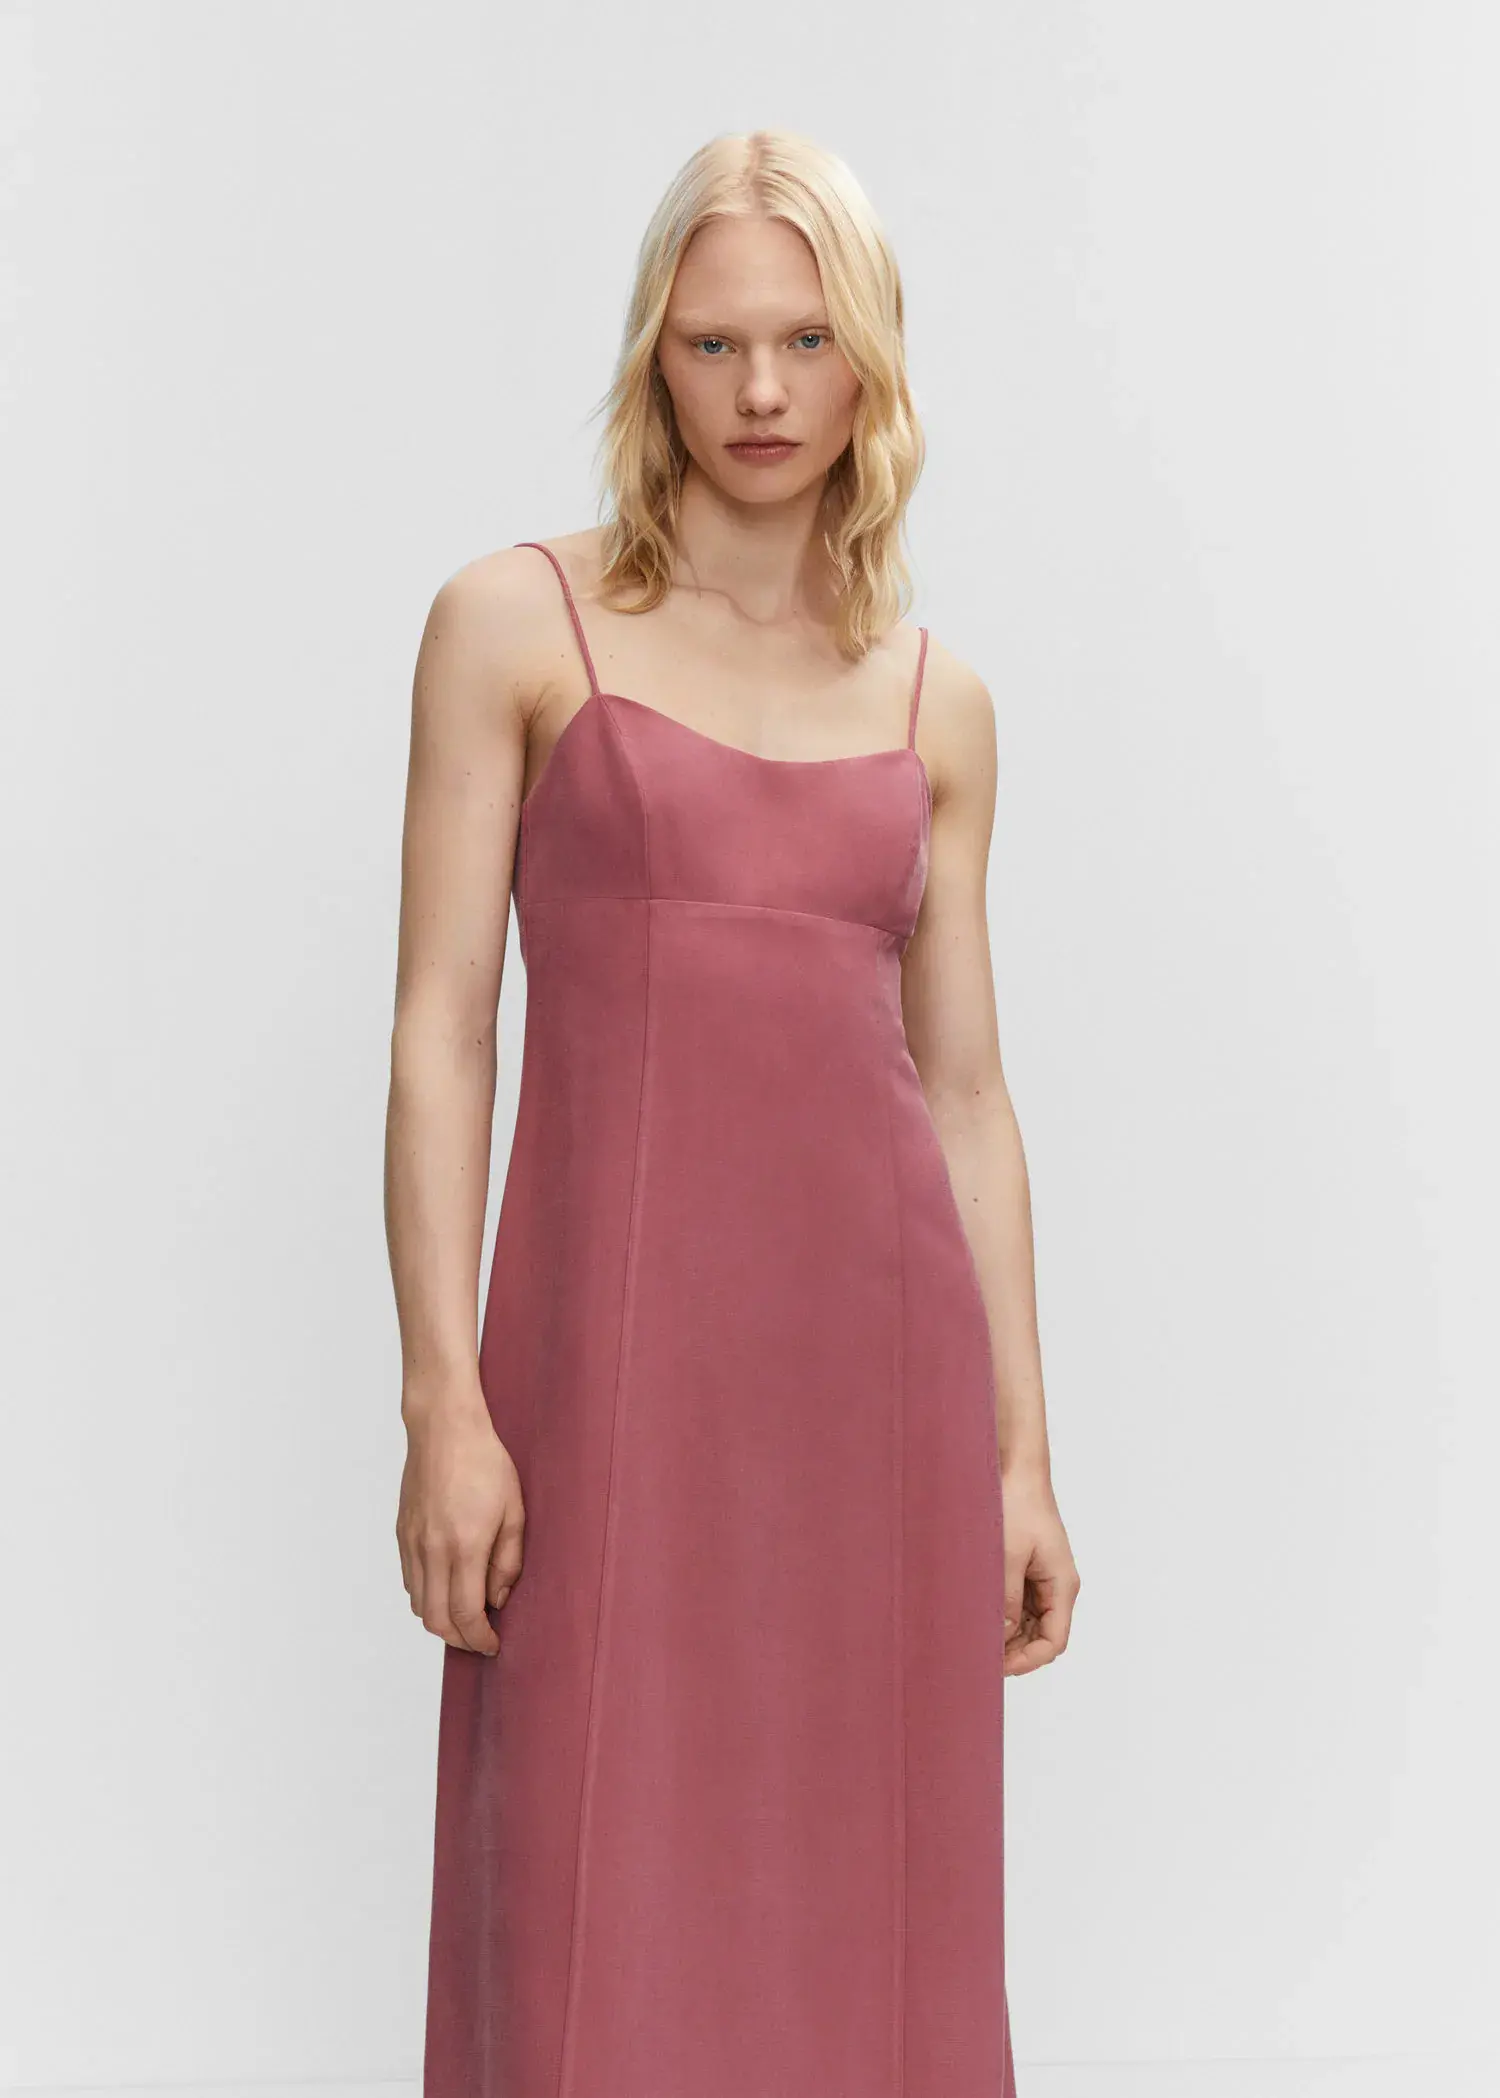 Mango Low-cut midi-dress. a woman wearing a pink dress standing in front of a white wall. 